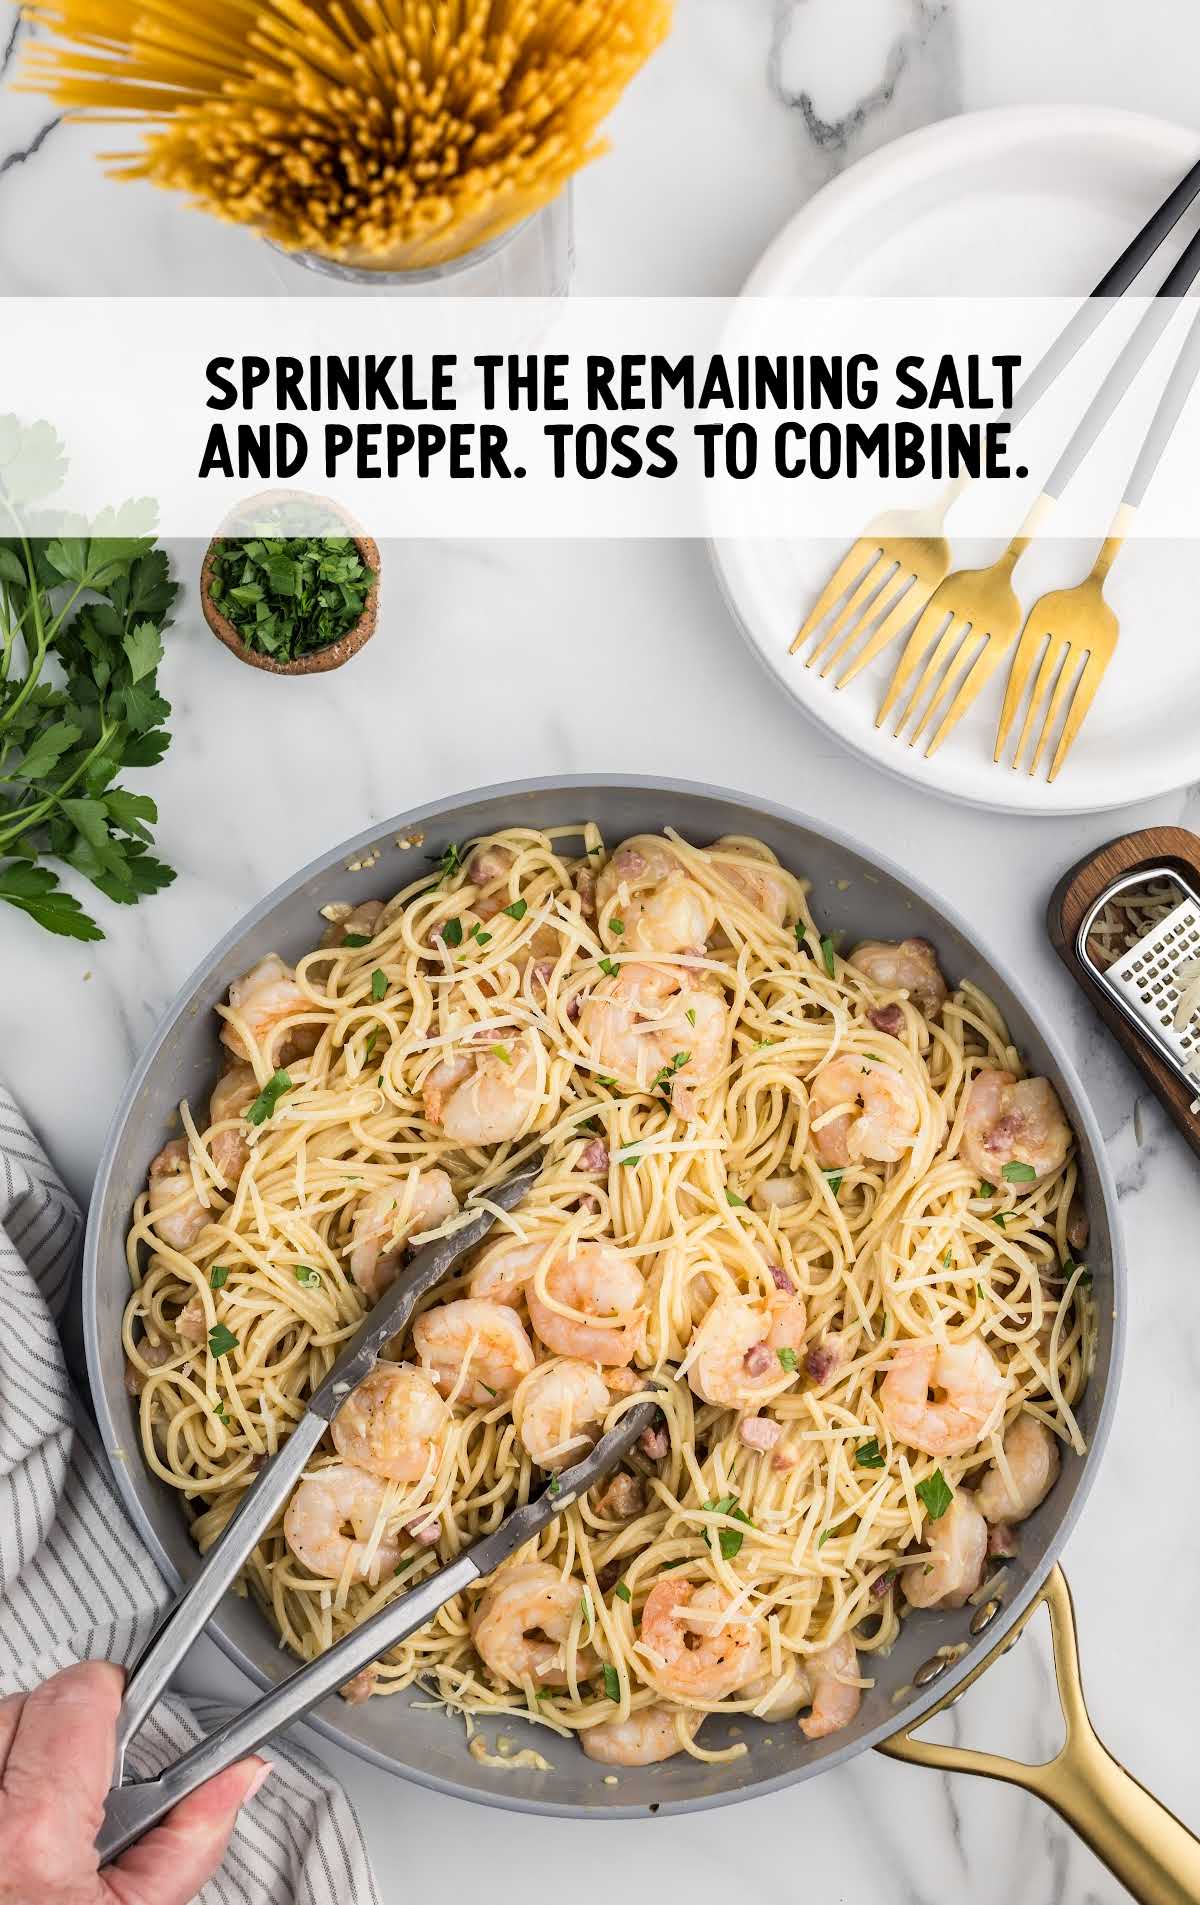 salt and pepper sprinkled into pasta and toss